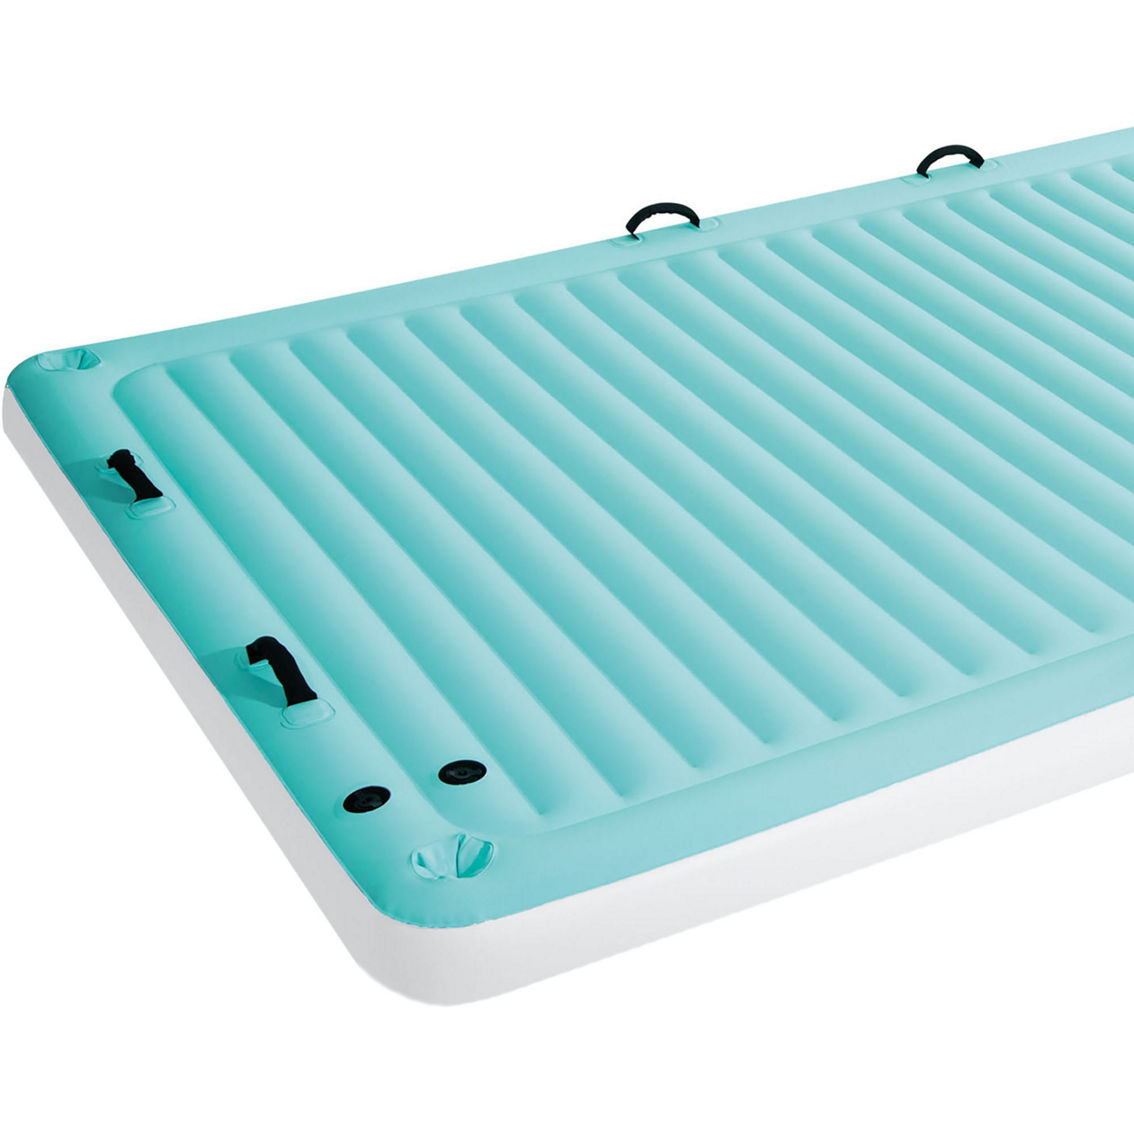 Intex Teal and White Floating Water Lounge - Image 3 of 5